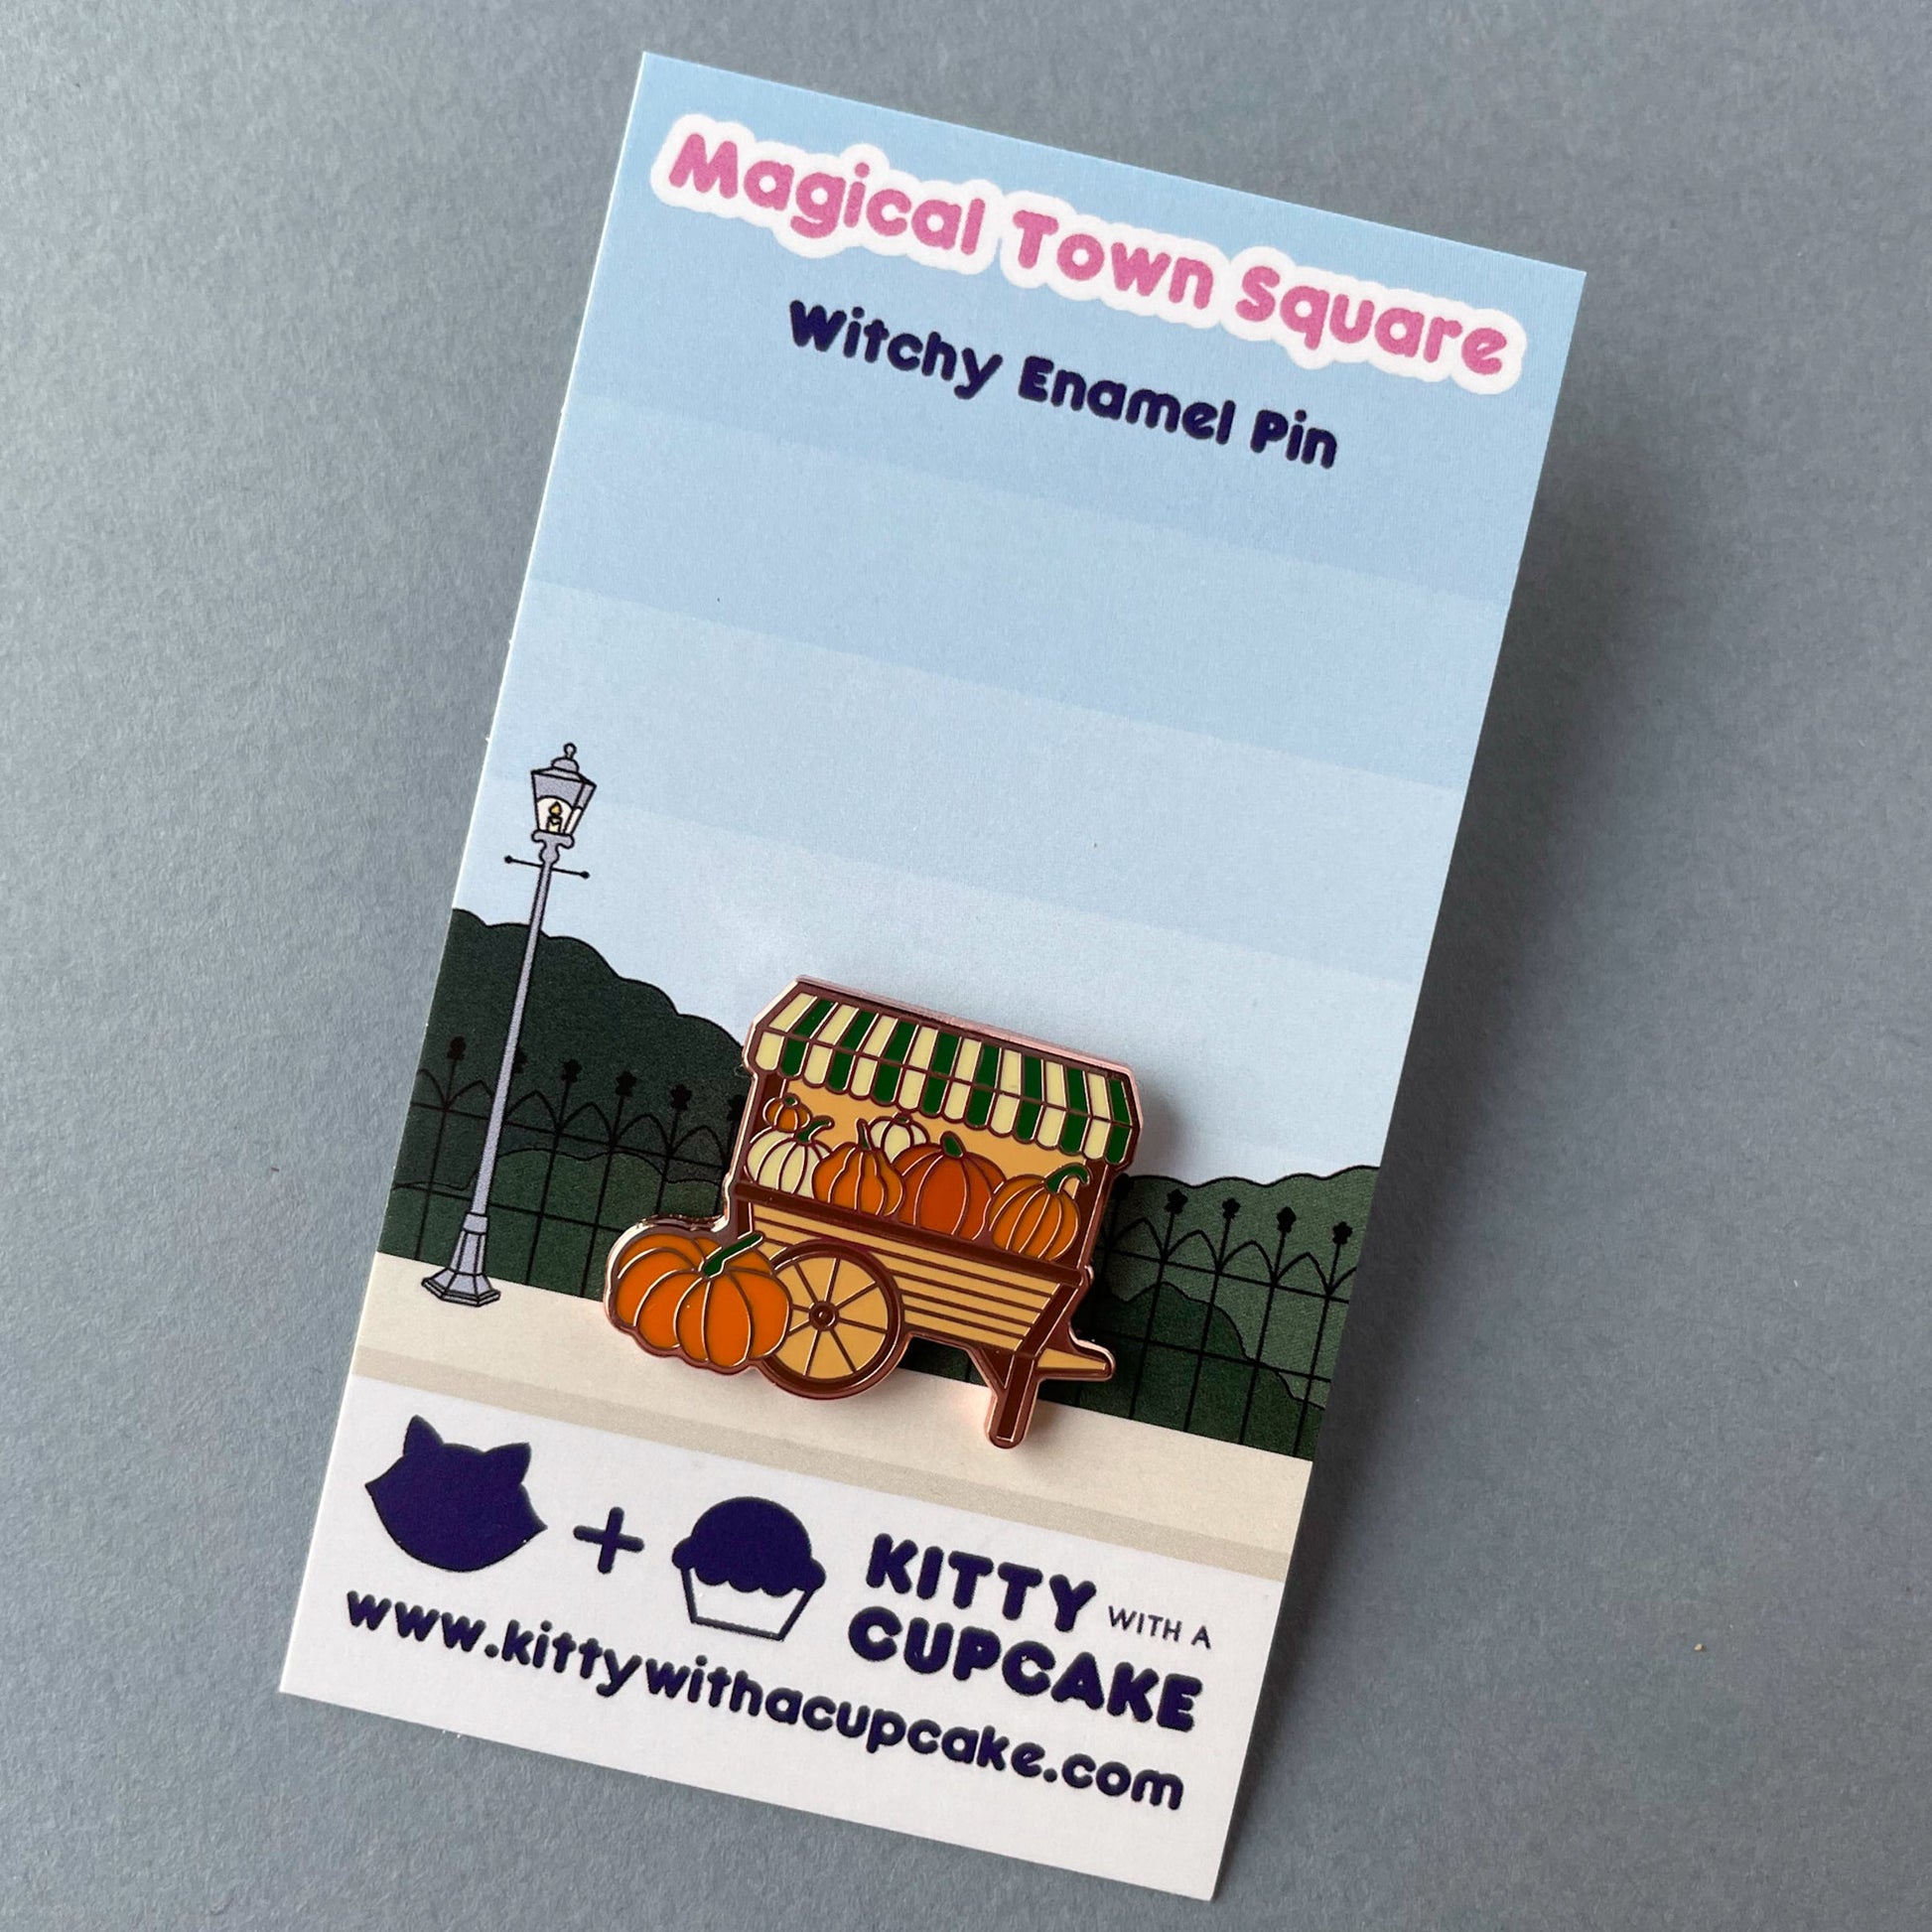 A pumpkin cart pin attached to its backing card which reads "Magical Town Square Witchy Enamel Pin" and has a street with a fence and lamp post on it.